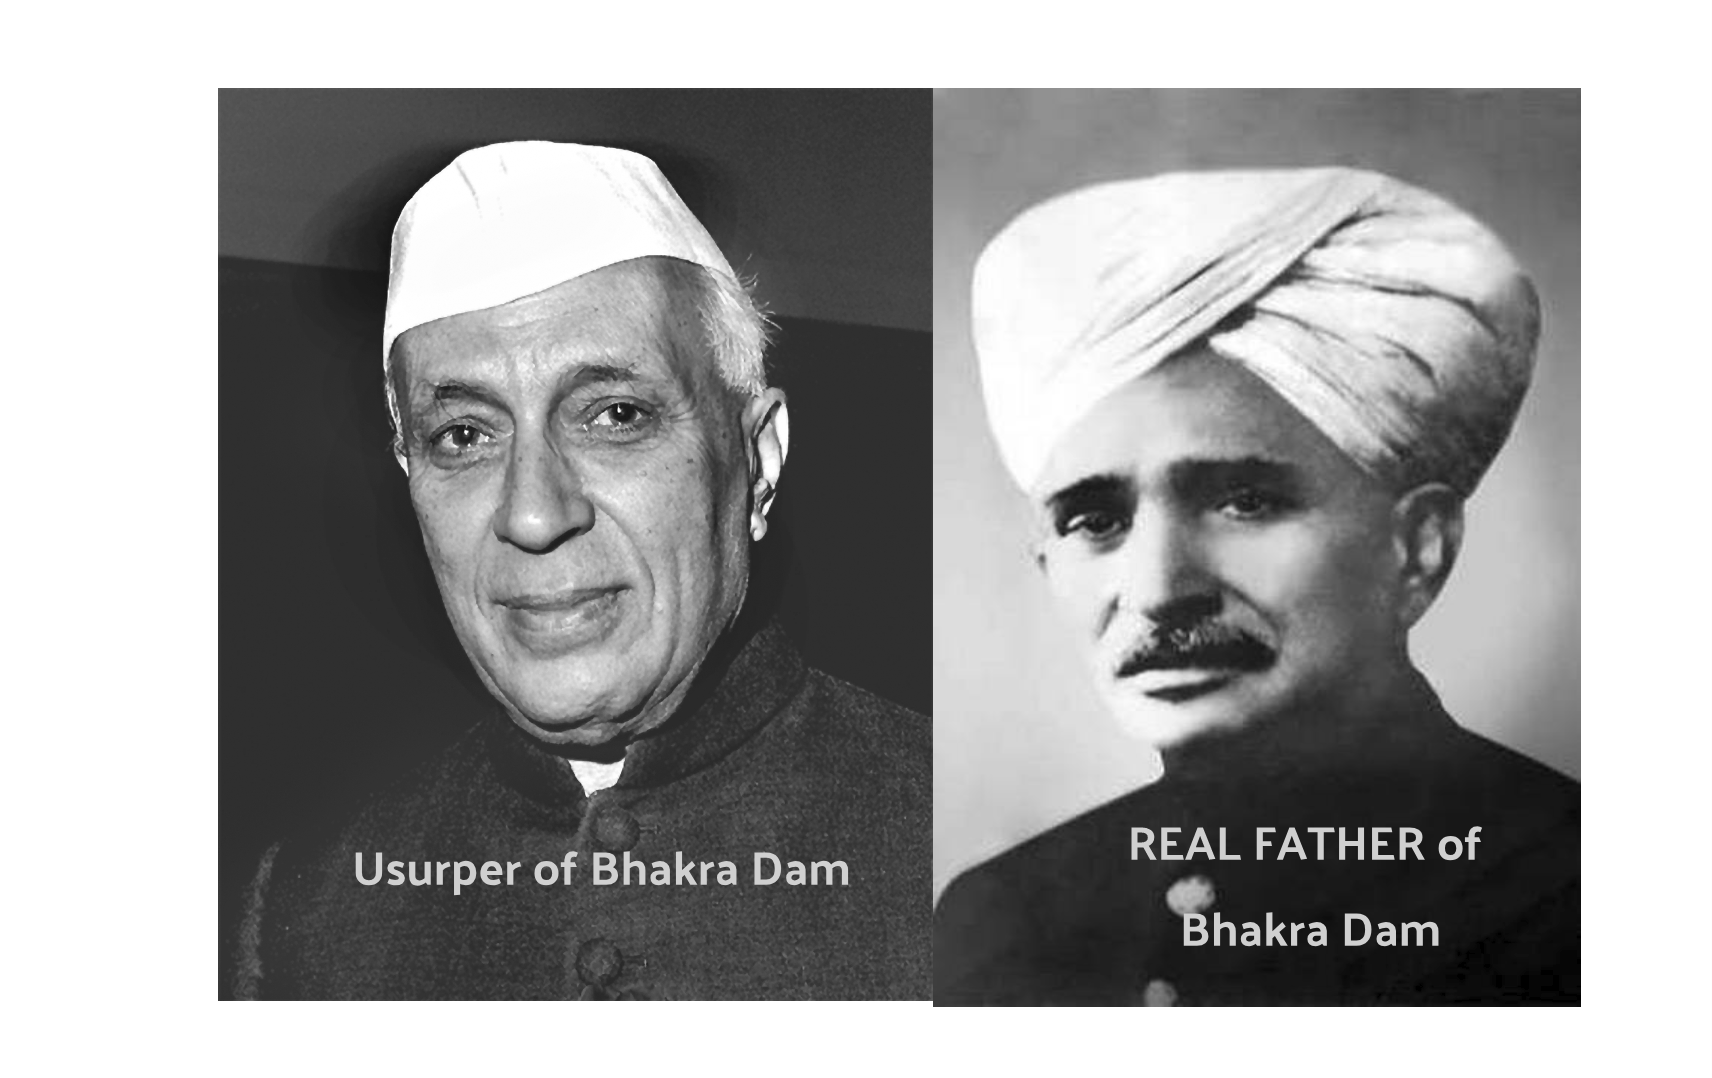 History Lies – Nehru was NOT the Father of Bhakra Dam, Sir Chhotu Ram was!